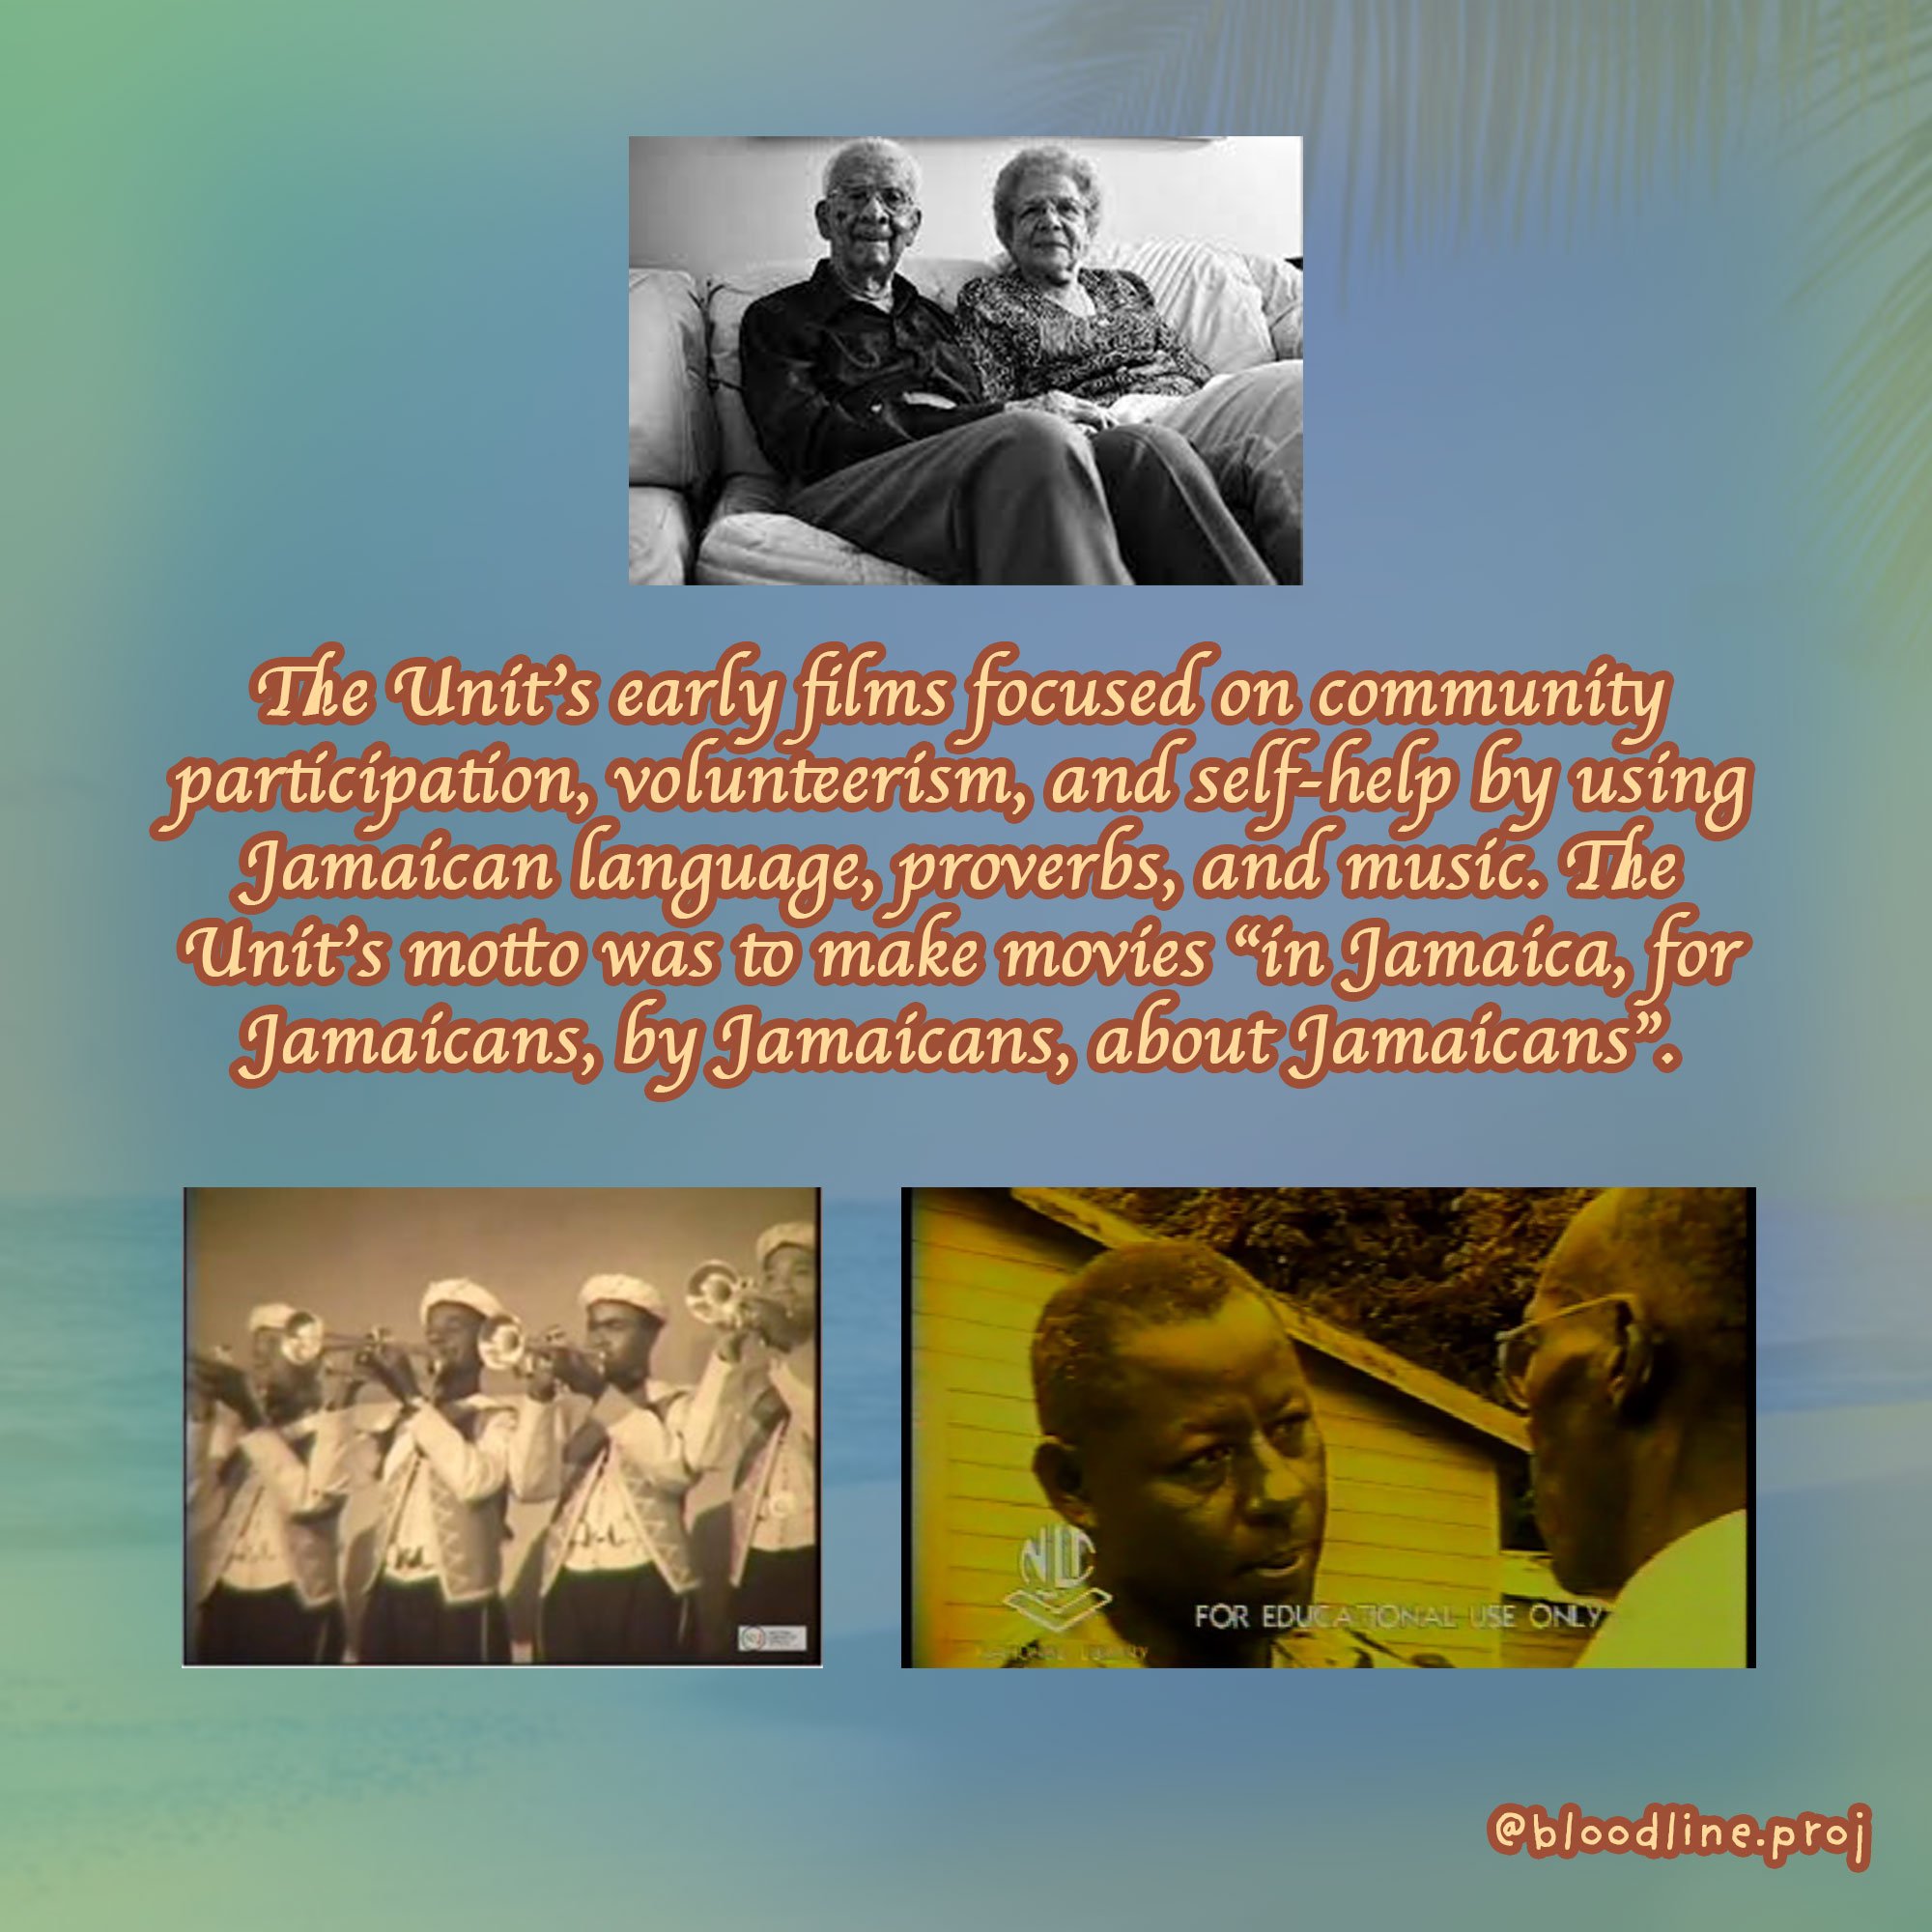  The Unit’s early films focused on community participation, volunteerism, and self-help by using Jamaican language, proverbs, and music. The Unit’s motto was to make movies “in Jamaica, for Jamaicans, by Jamaicans, about Jamaicans”. 